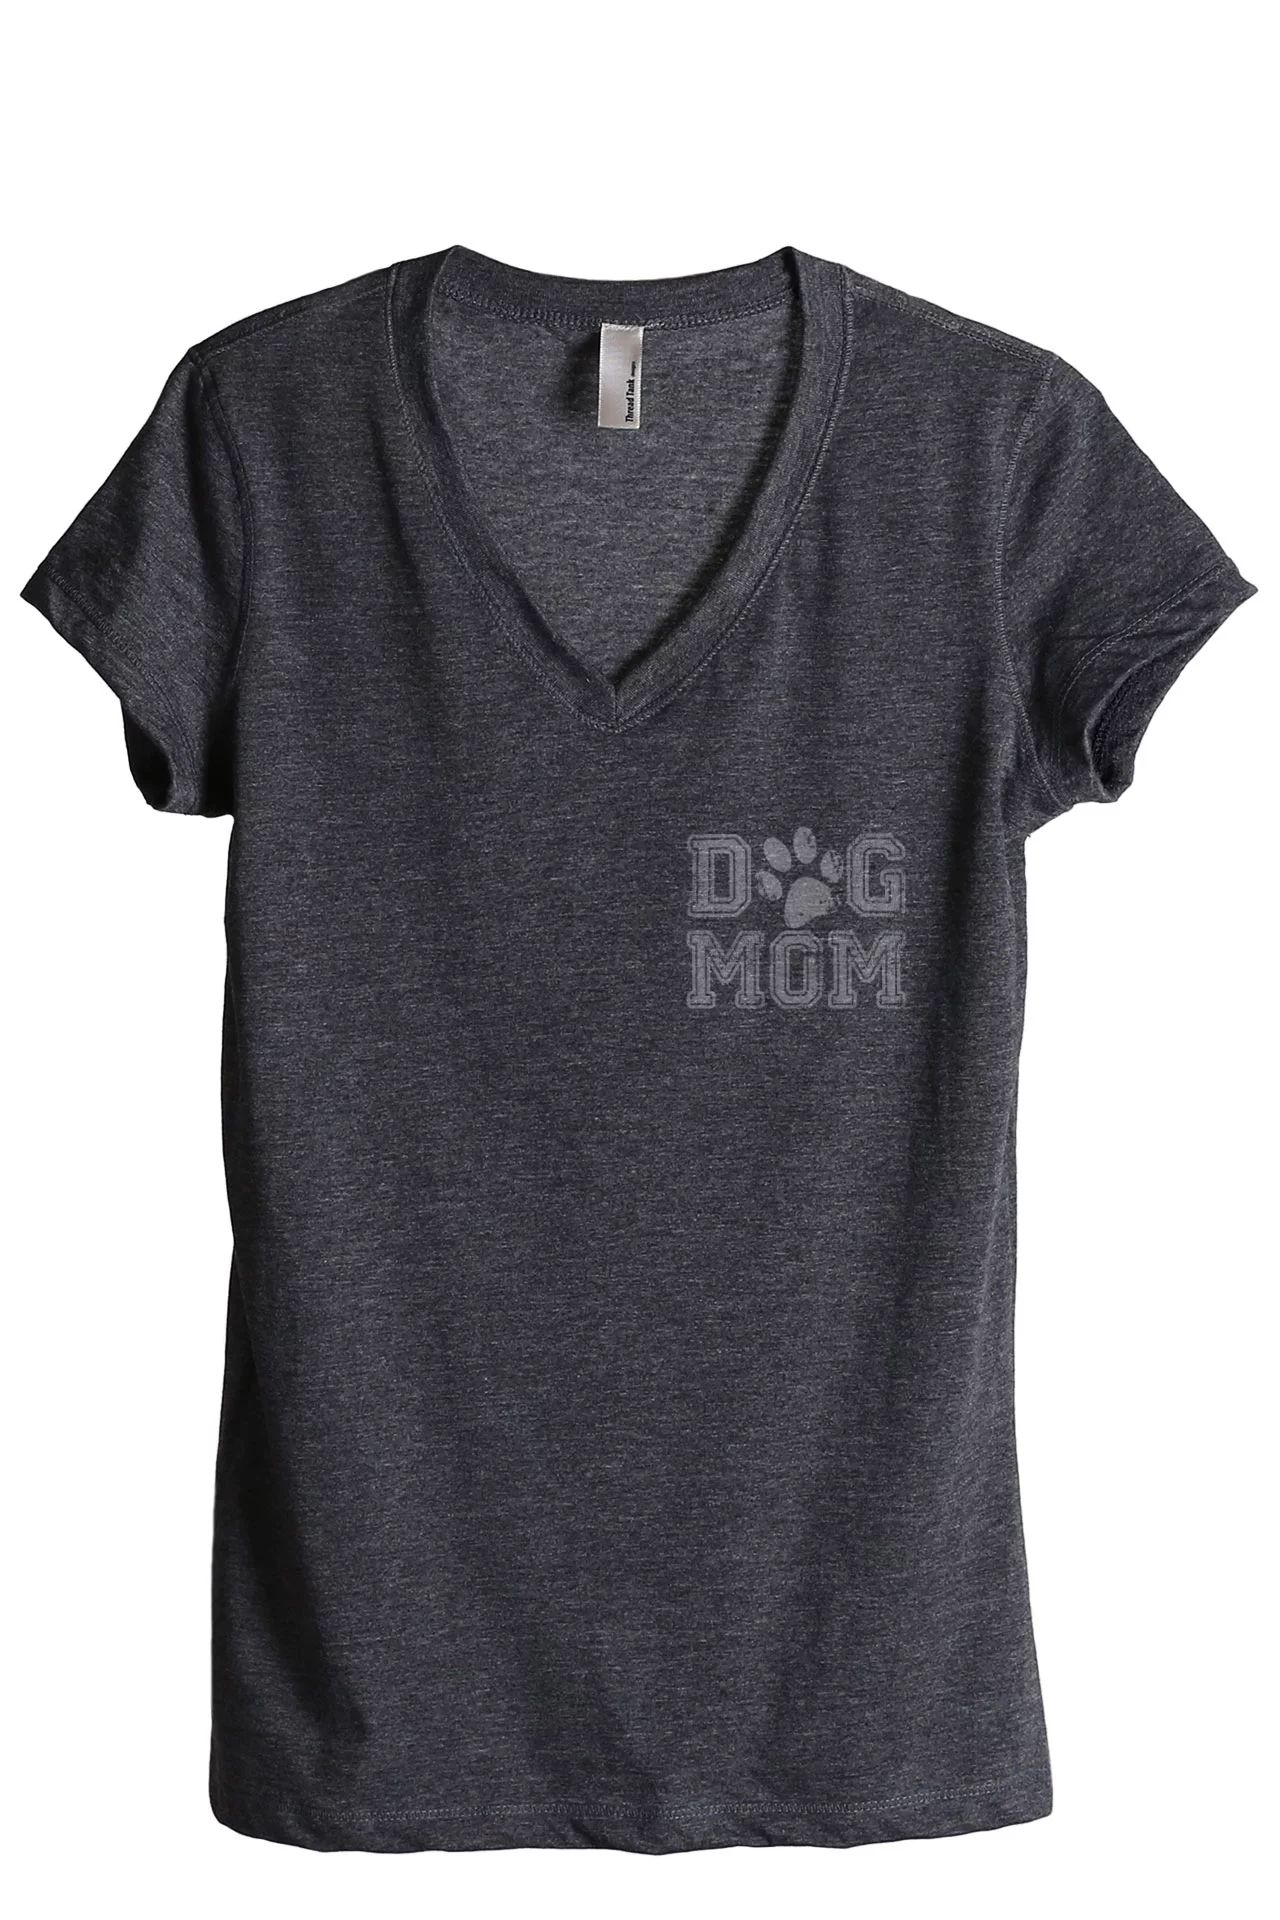 Thread Tank Dog Mom Women's Relaxed V-Neck T-Shirt Tee Charcoal X-Large | Walmart (US)